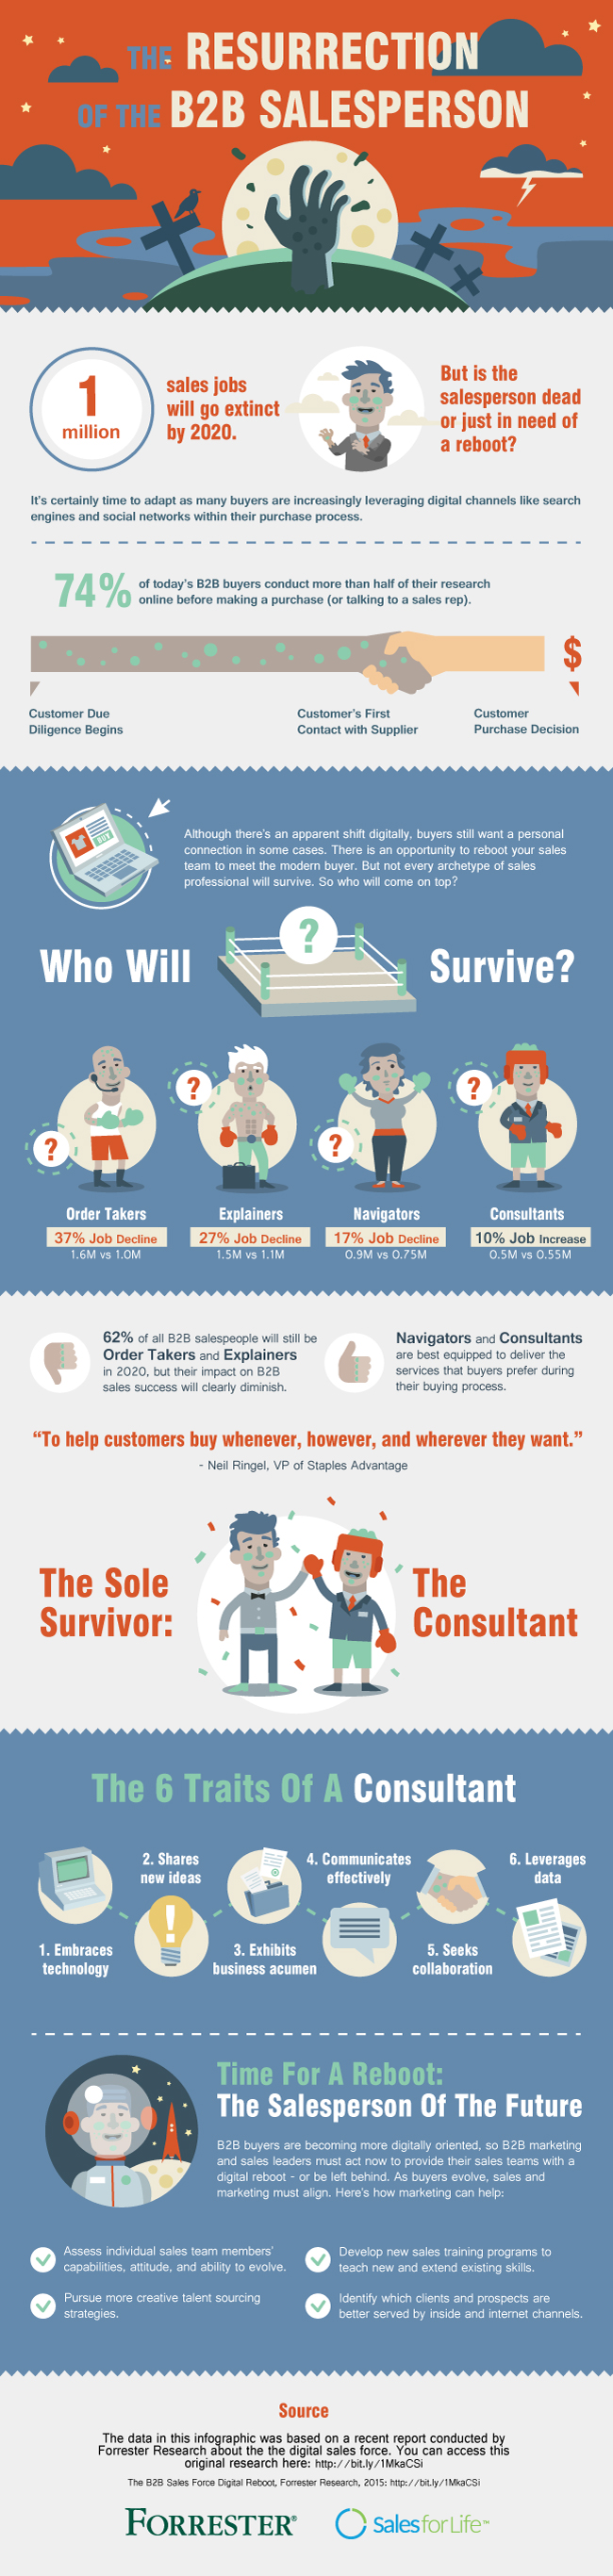 The resurrection of the b2b salesperson infographic - Forrester and SalesForLife